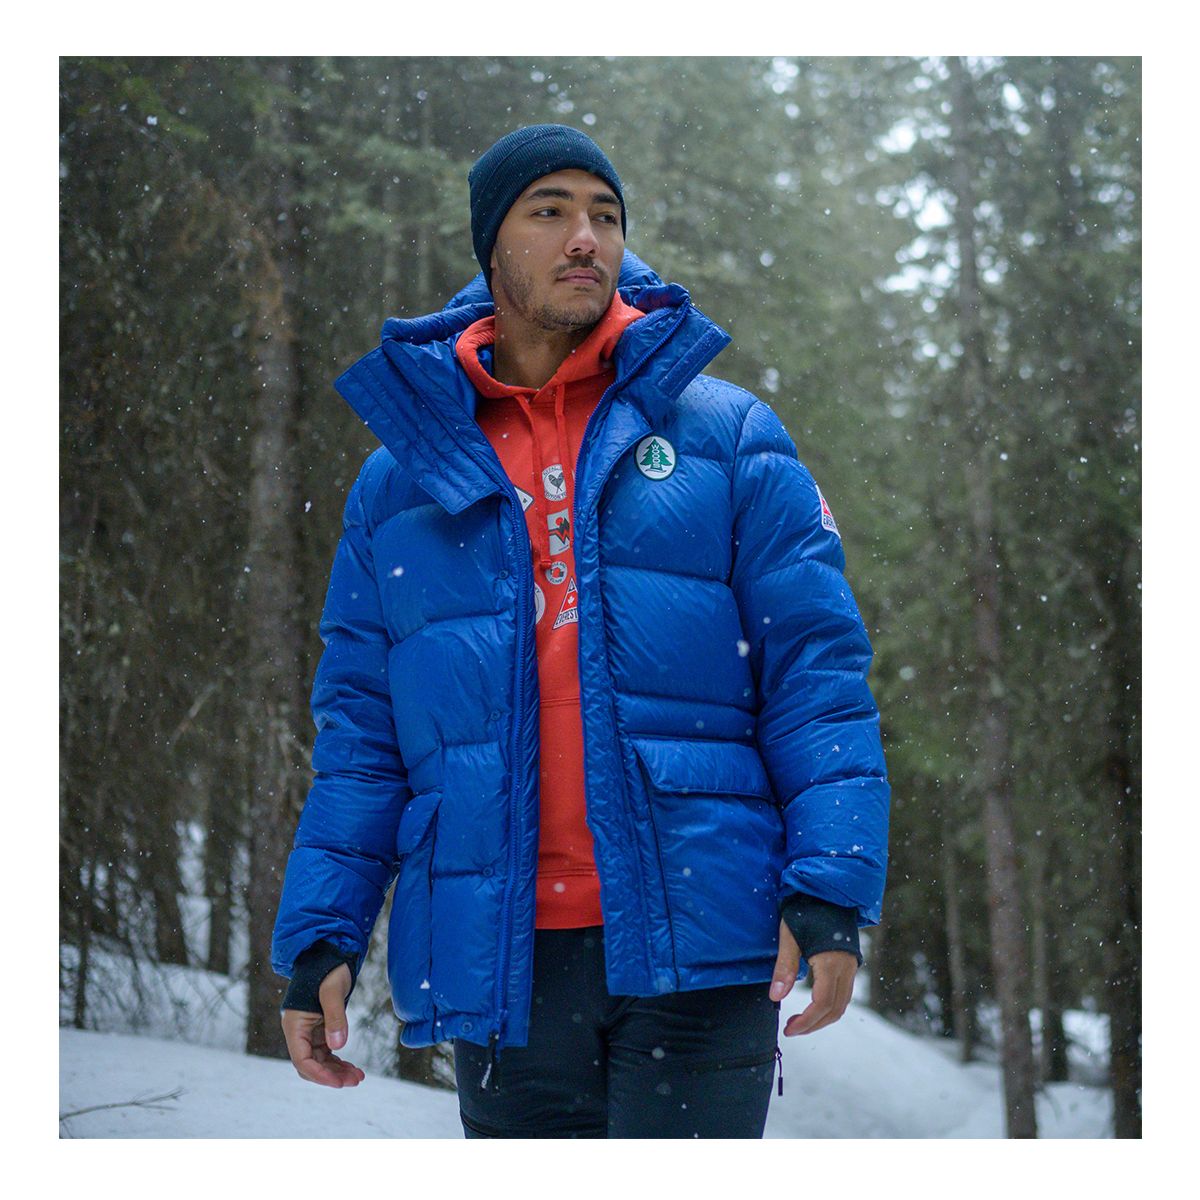 Capa Insulated Hooded Jacket - Men's | Hooded jacket men, Hooded jacket,  Hooded jacket design